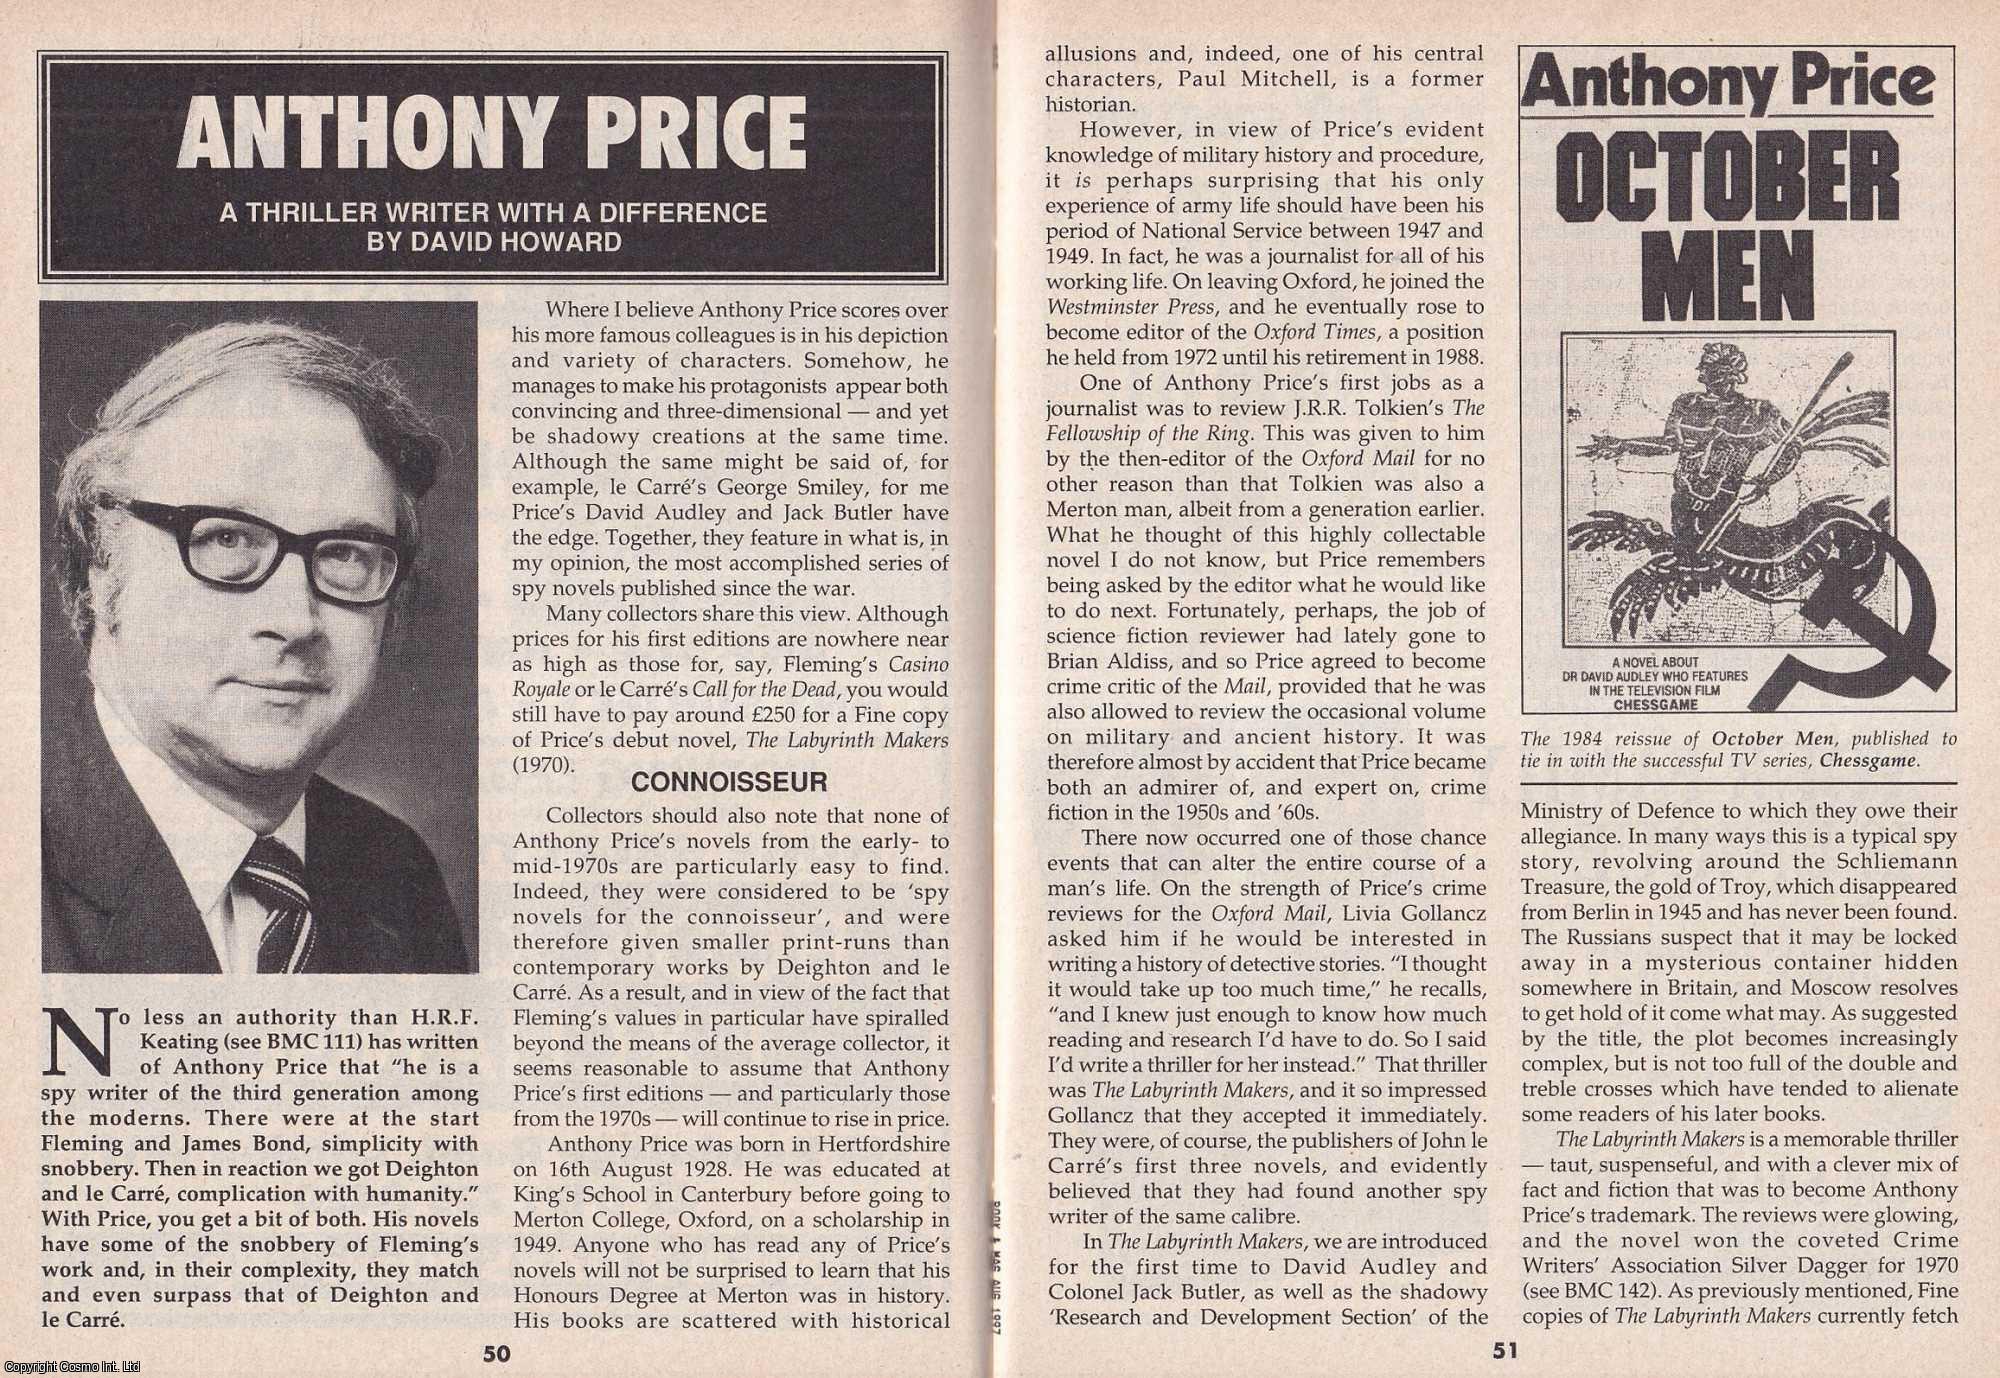 David Howard - Anthony Price (thriller writer). This is an original article separated from an issue of The Book & Magazine Collector publication.